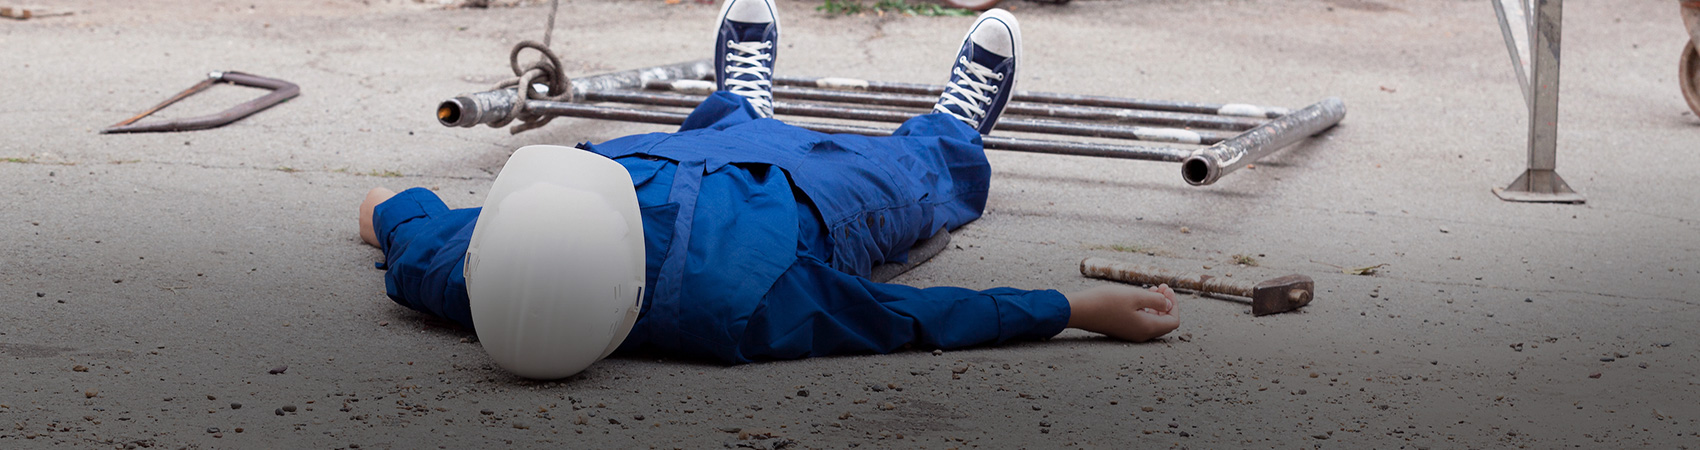 A construction worker lying down after an accident in a construction site